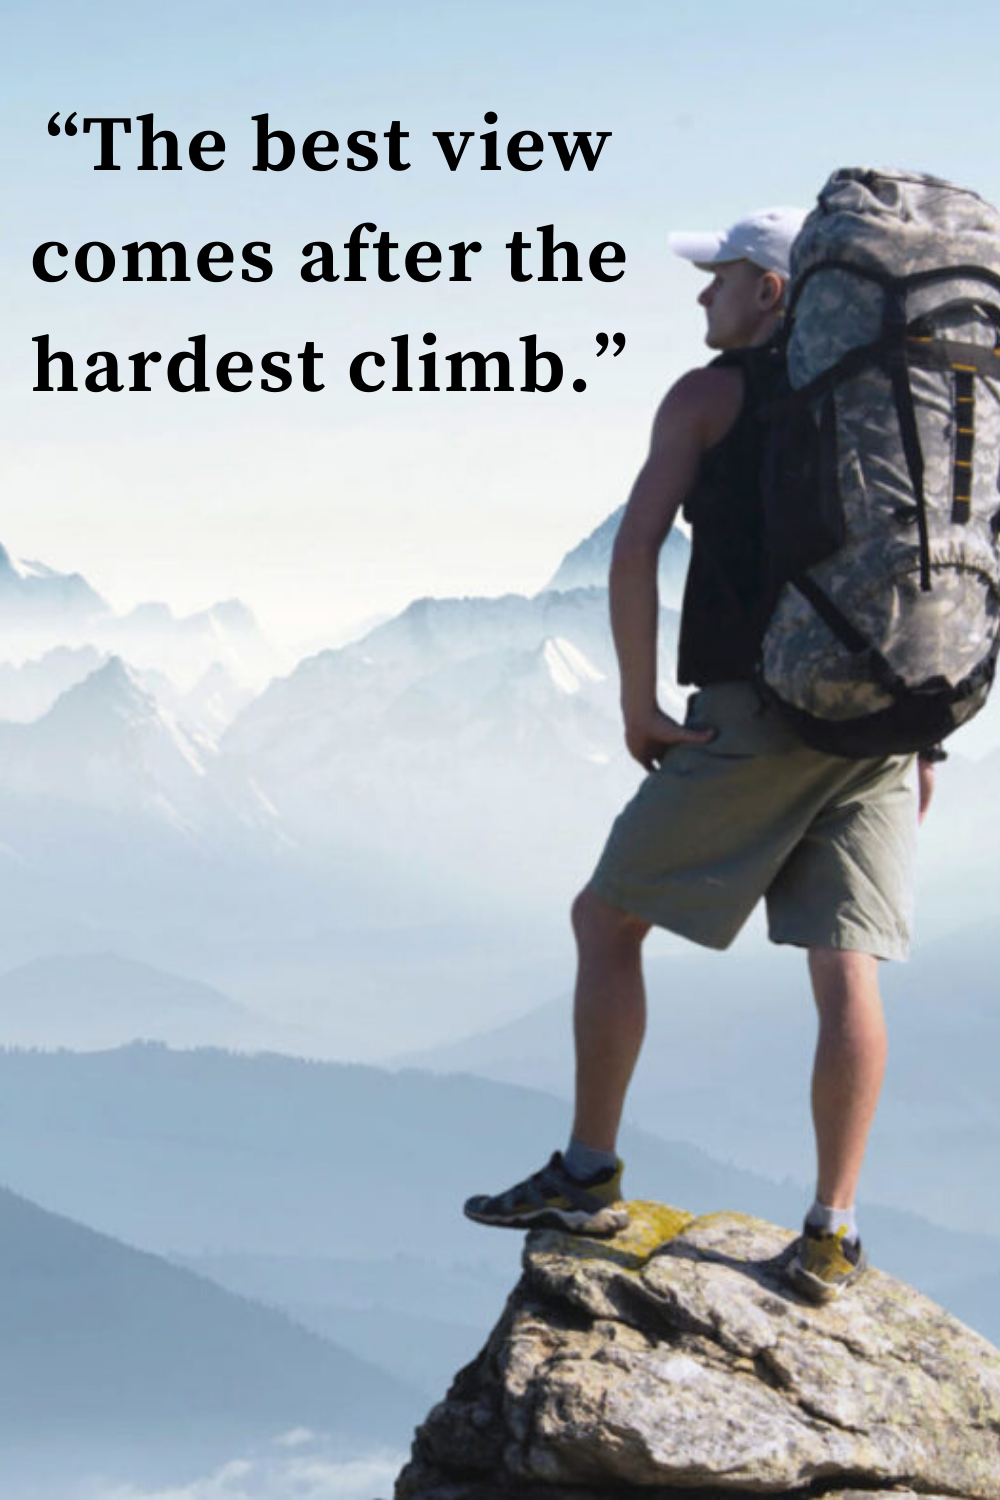 Motivational Quote - The best view comes after the hardest climb.